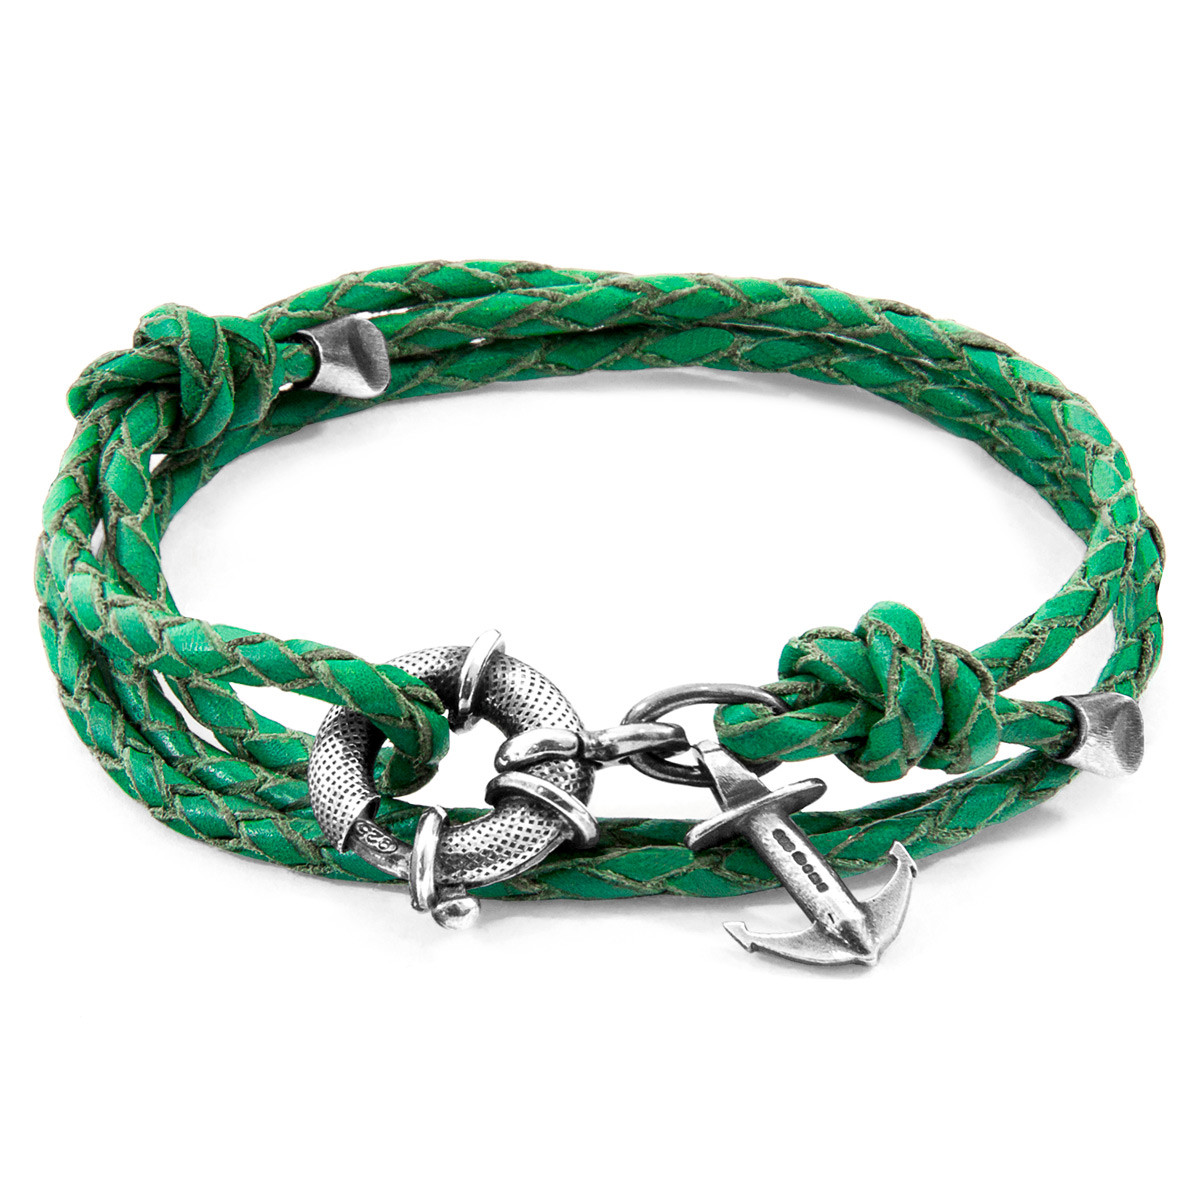 Anchor & Crew Fern Green Clyde Anchor Silver and Braided Leather Bracelet